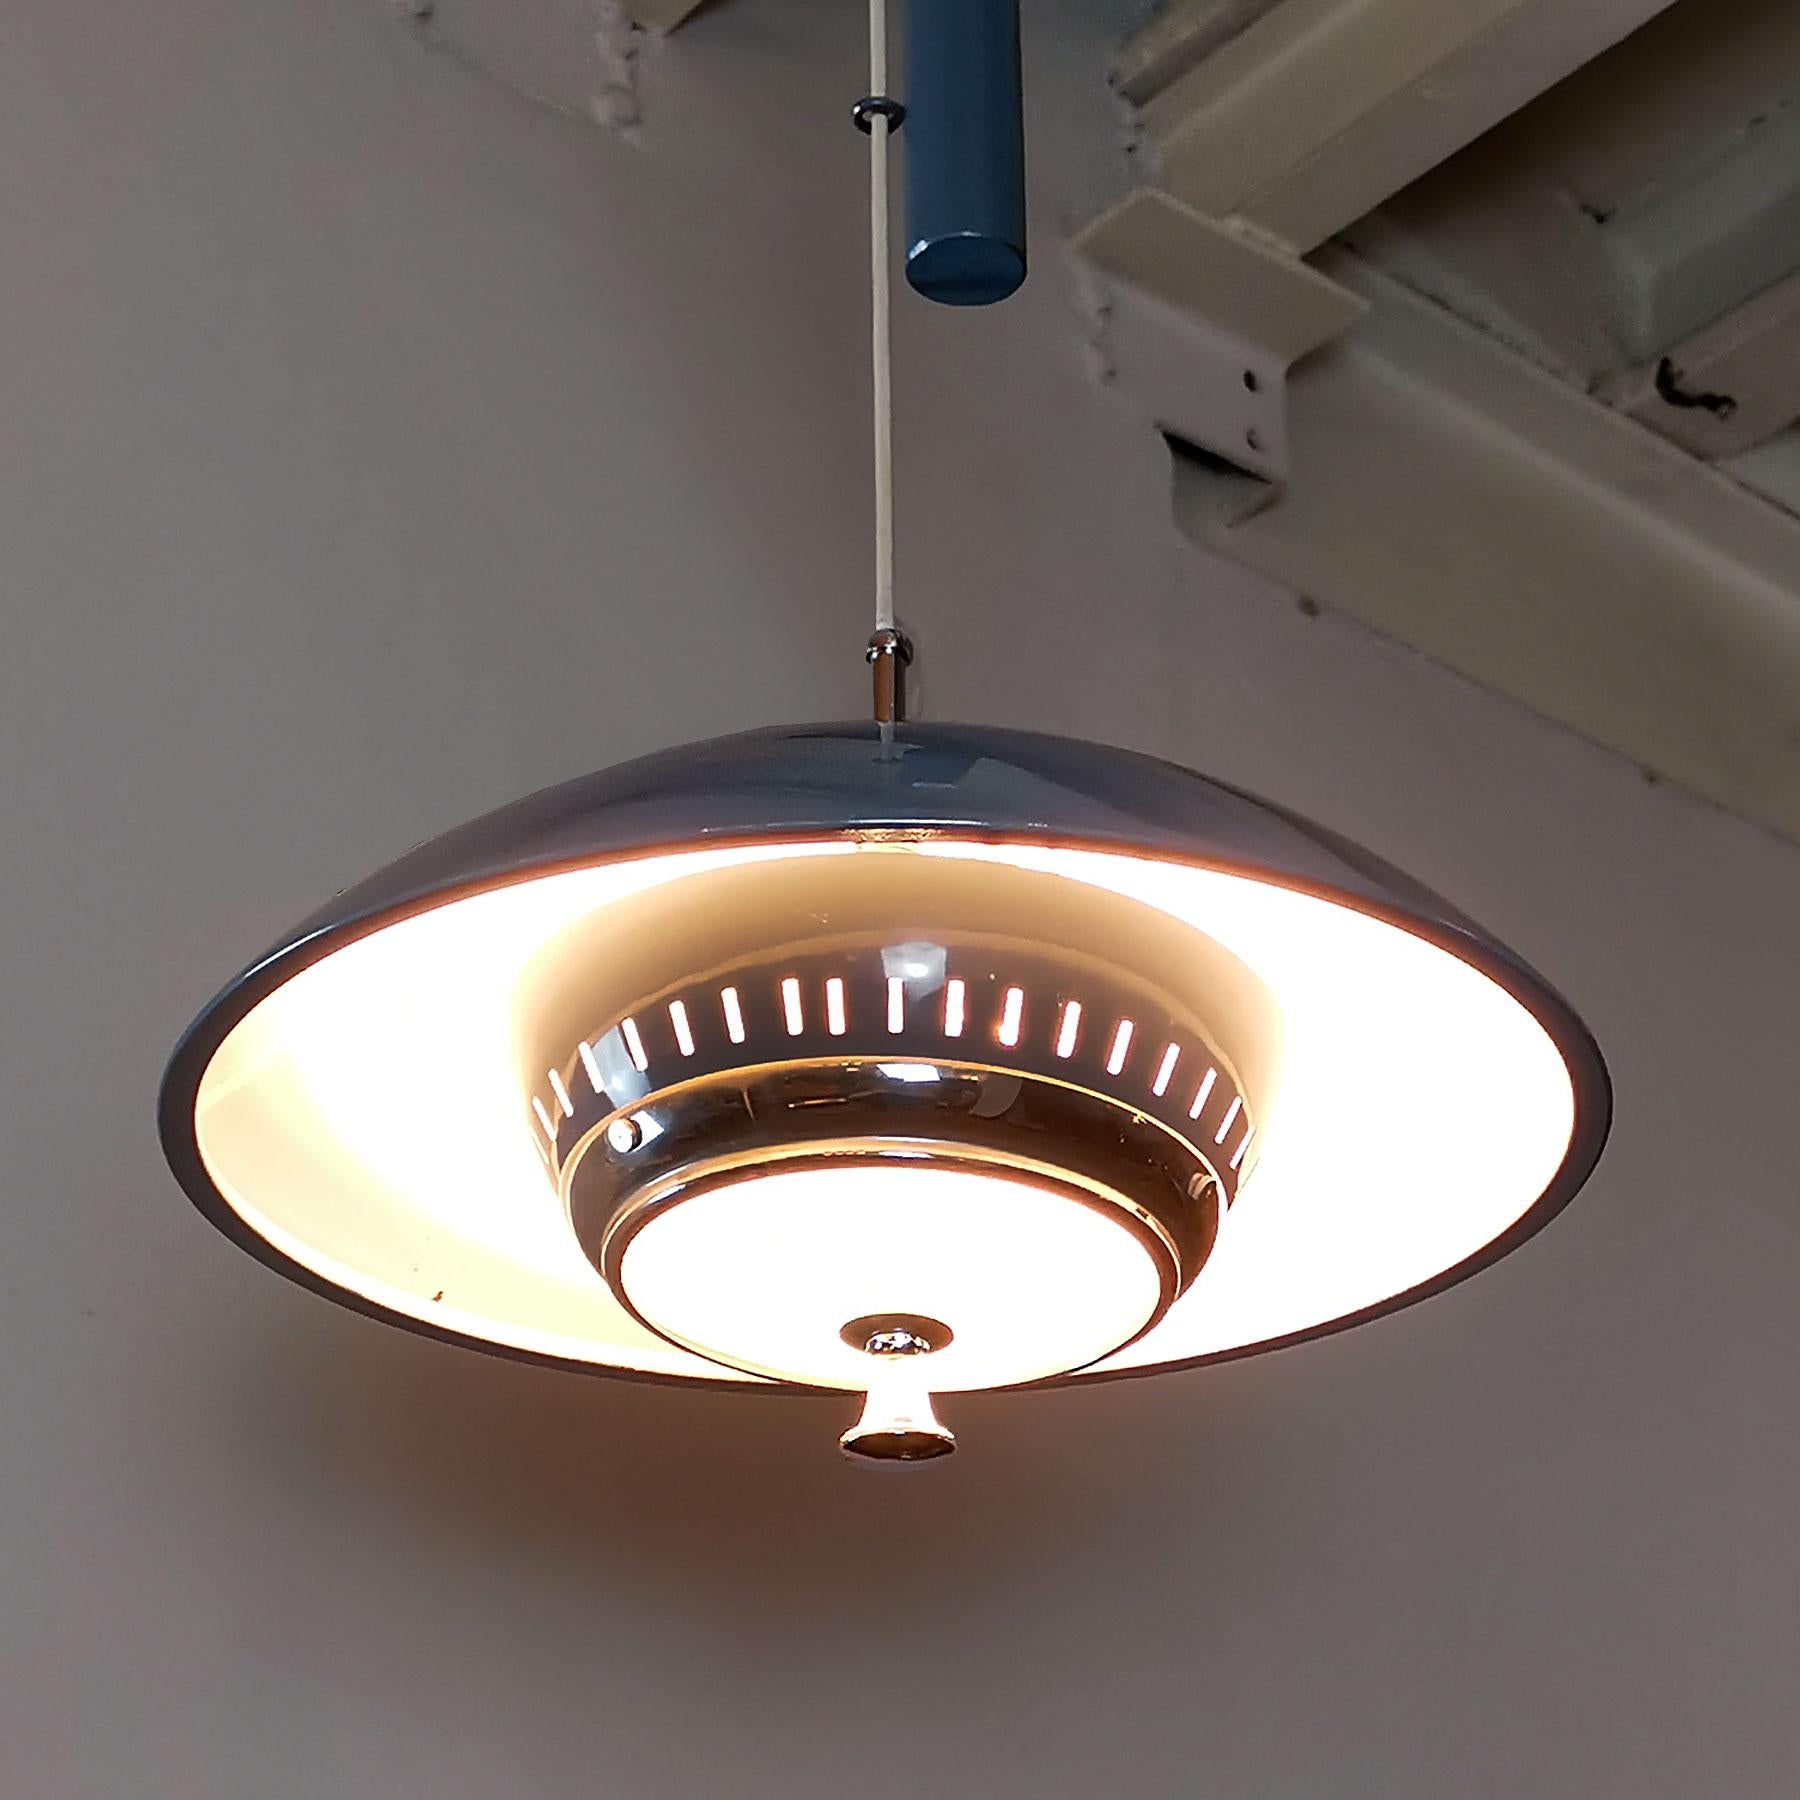 Plated 1940s Ceiling Lamp with Counterweight System, Blue Sheet Metal, Glass, Italy